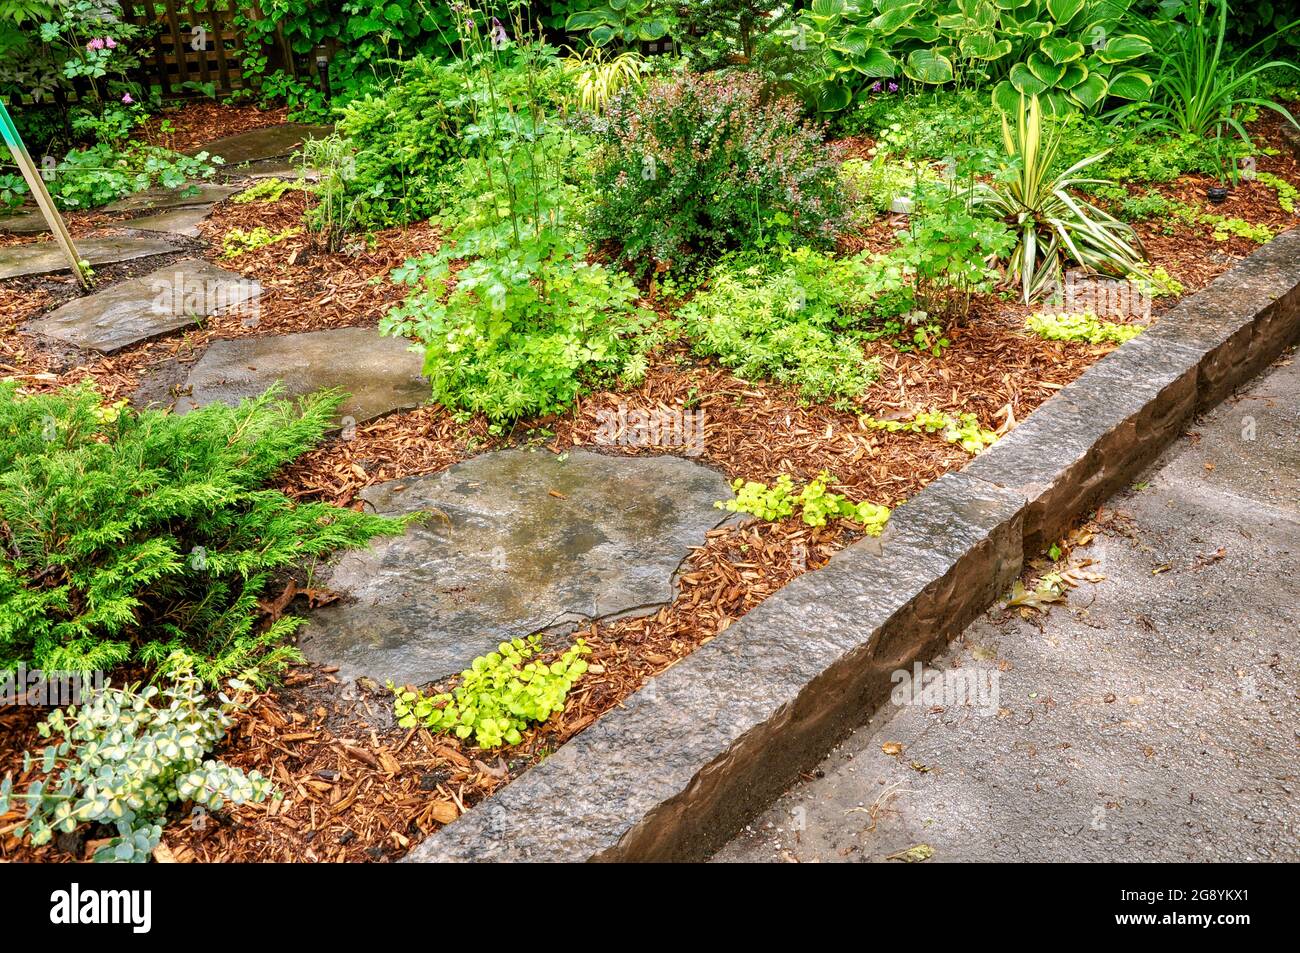 Flagstone stepping stones create a meandering path through a woodland garden. Stock Photo